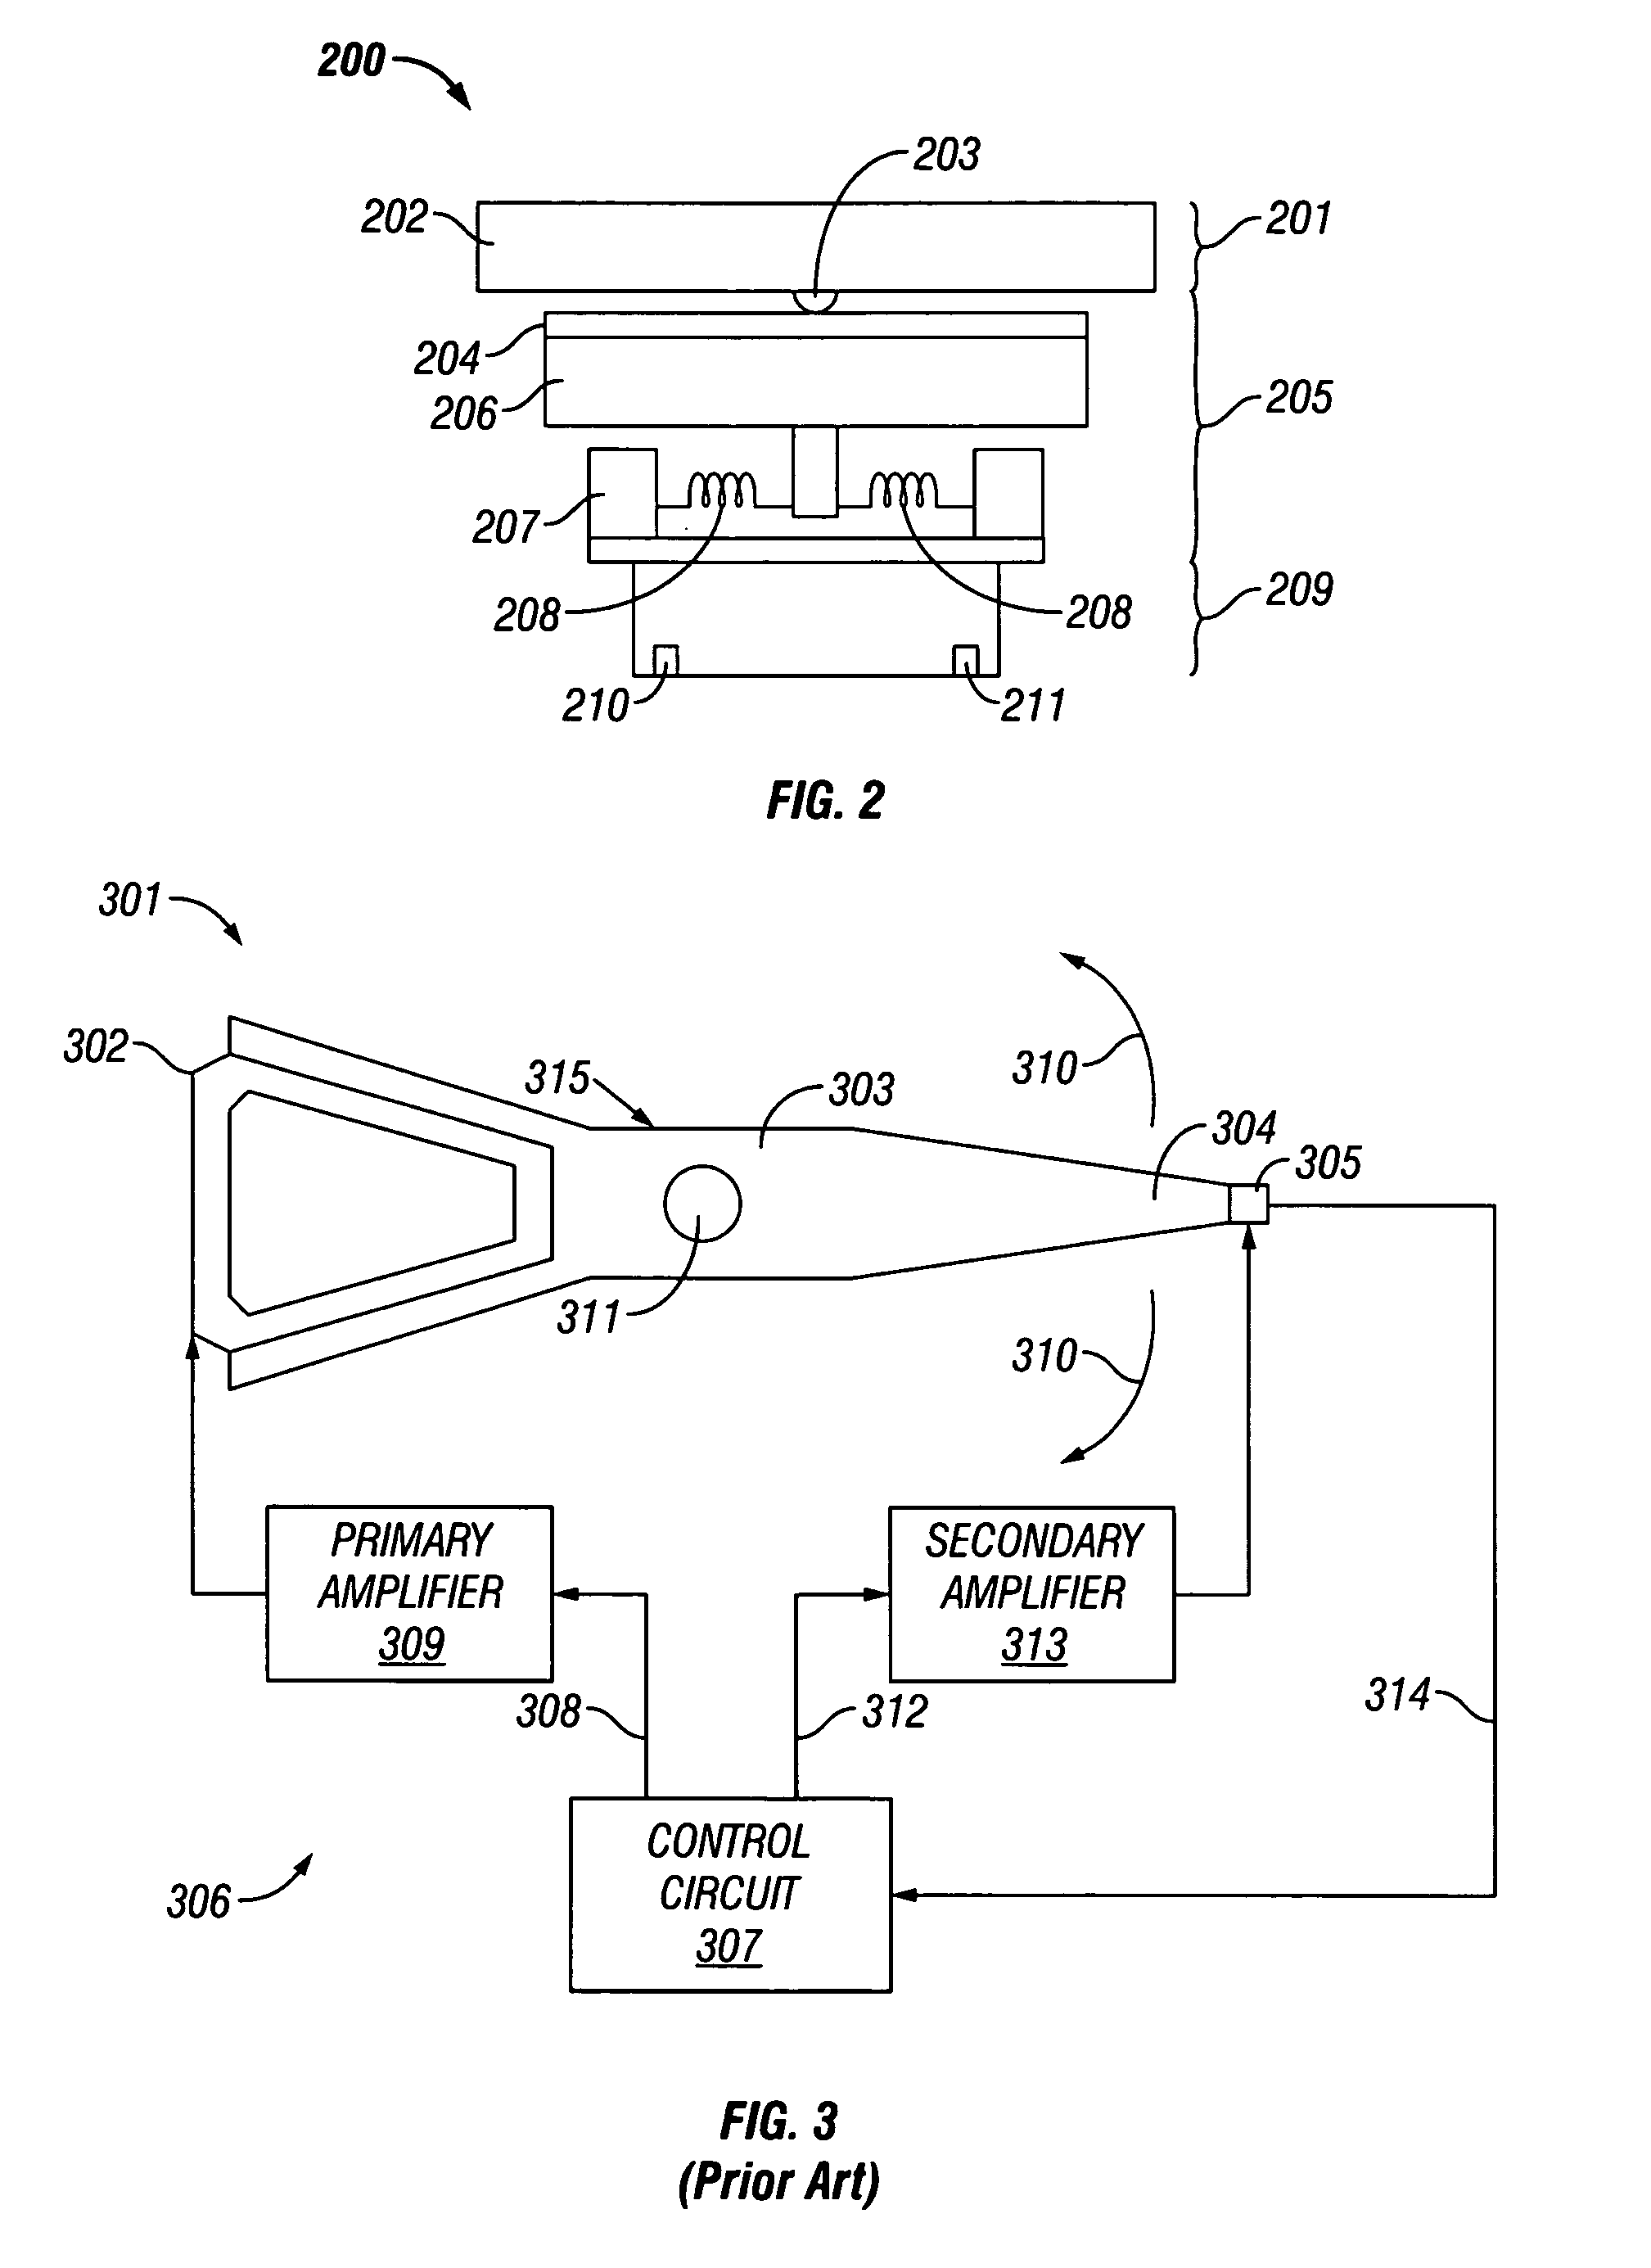 Technique to compensate for resonances and disturbances on primary actuator through use of a secondary actuator